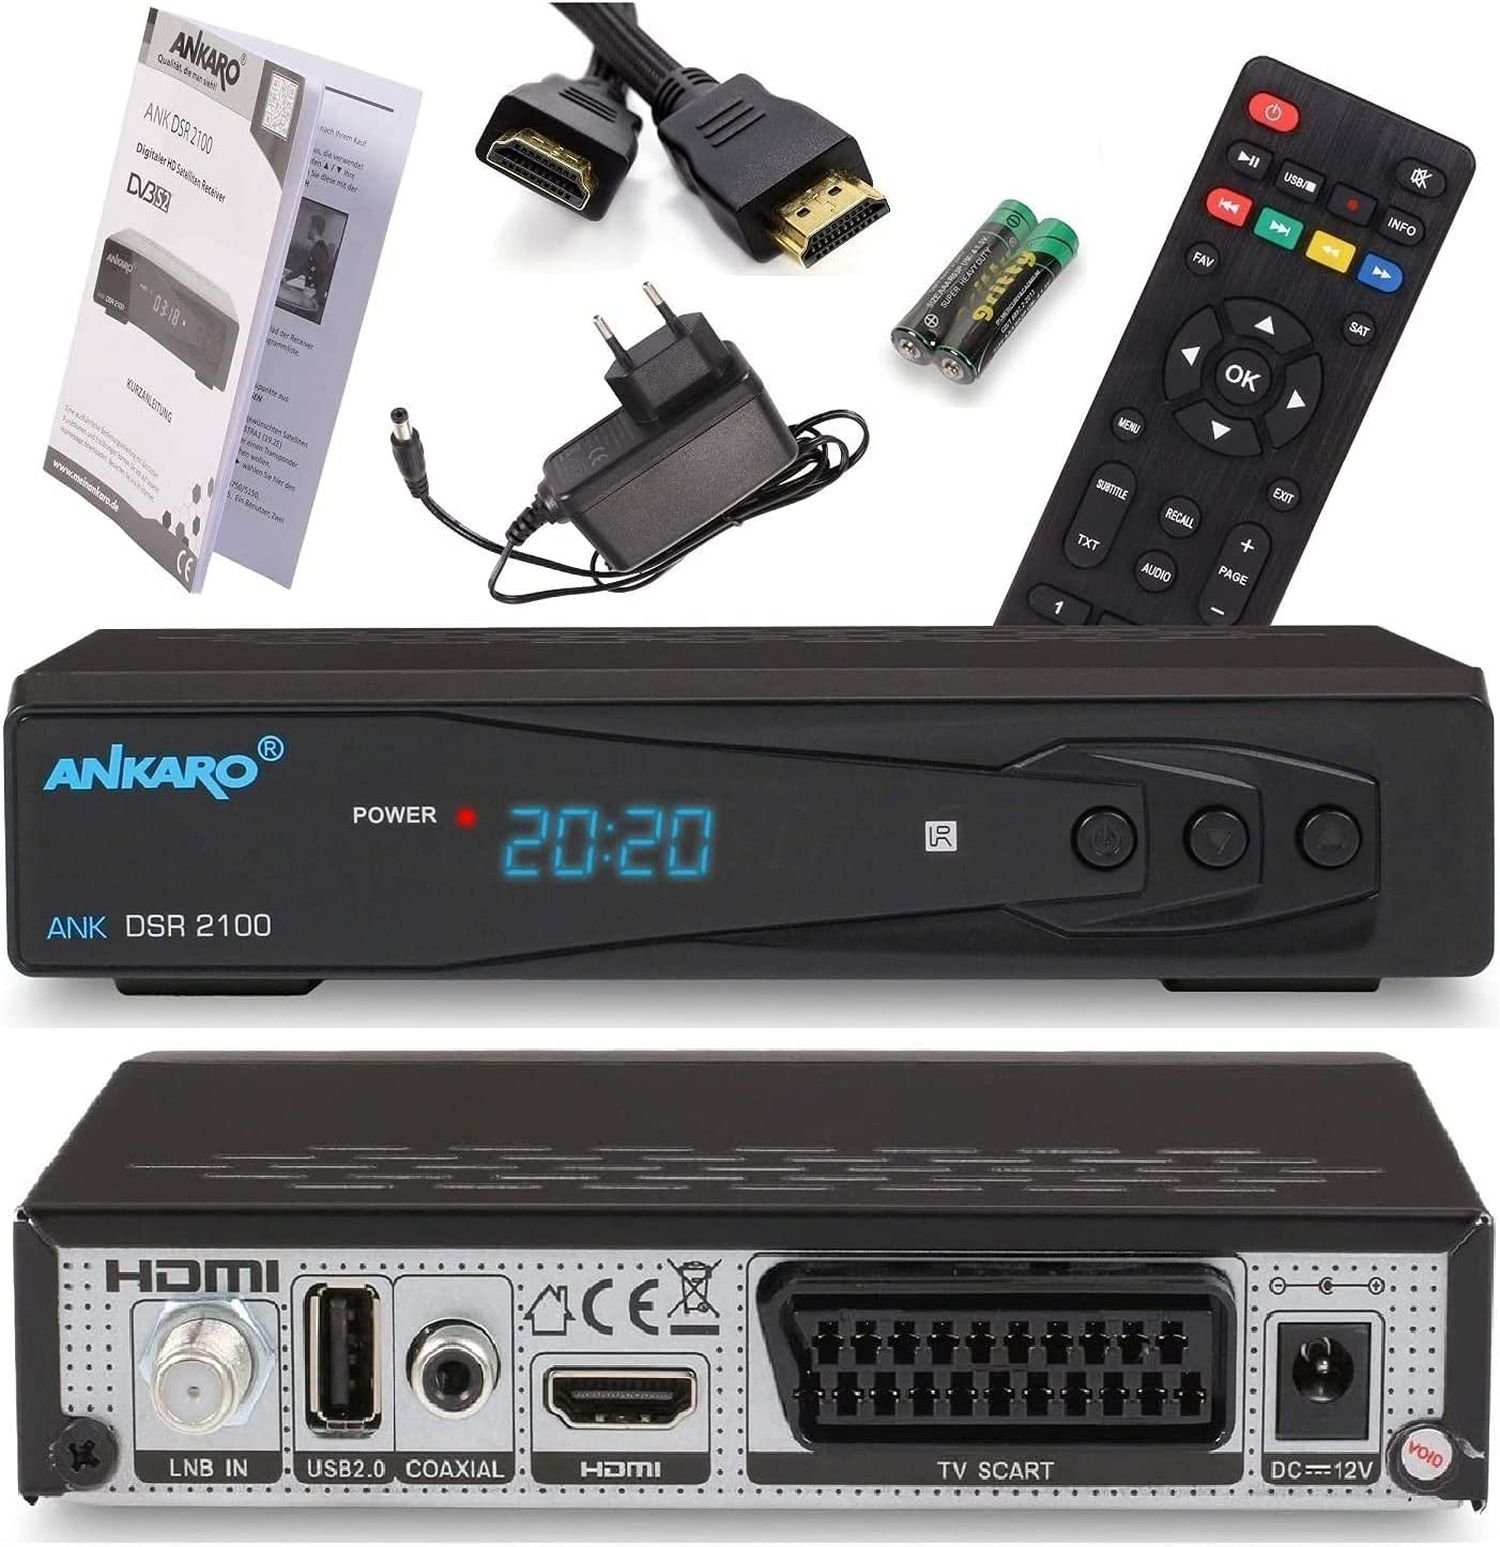 DSR HDMI Timeshift Aufnahmefunktion (PVR, USB, Coaxial mit tauglich) SCART, HDMI, Kabel - SAT-Receiver + & Unicable 2100 Ankaro